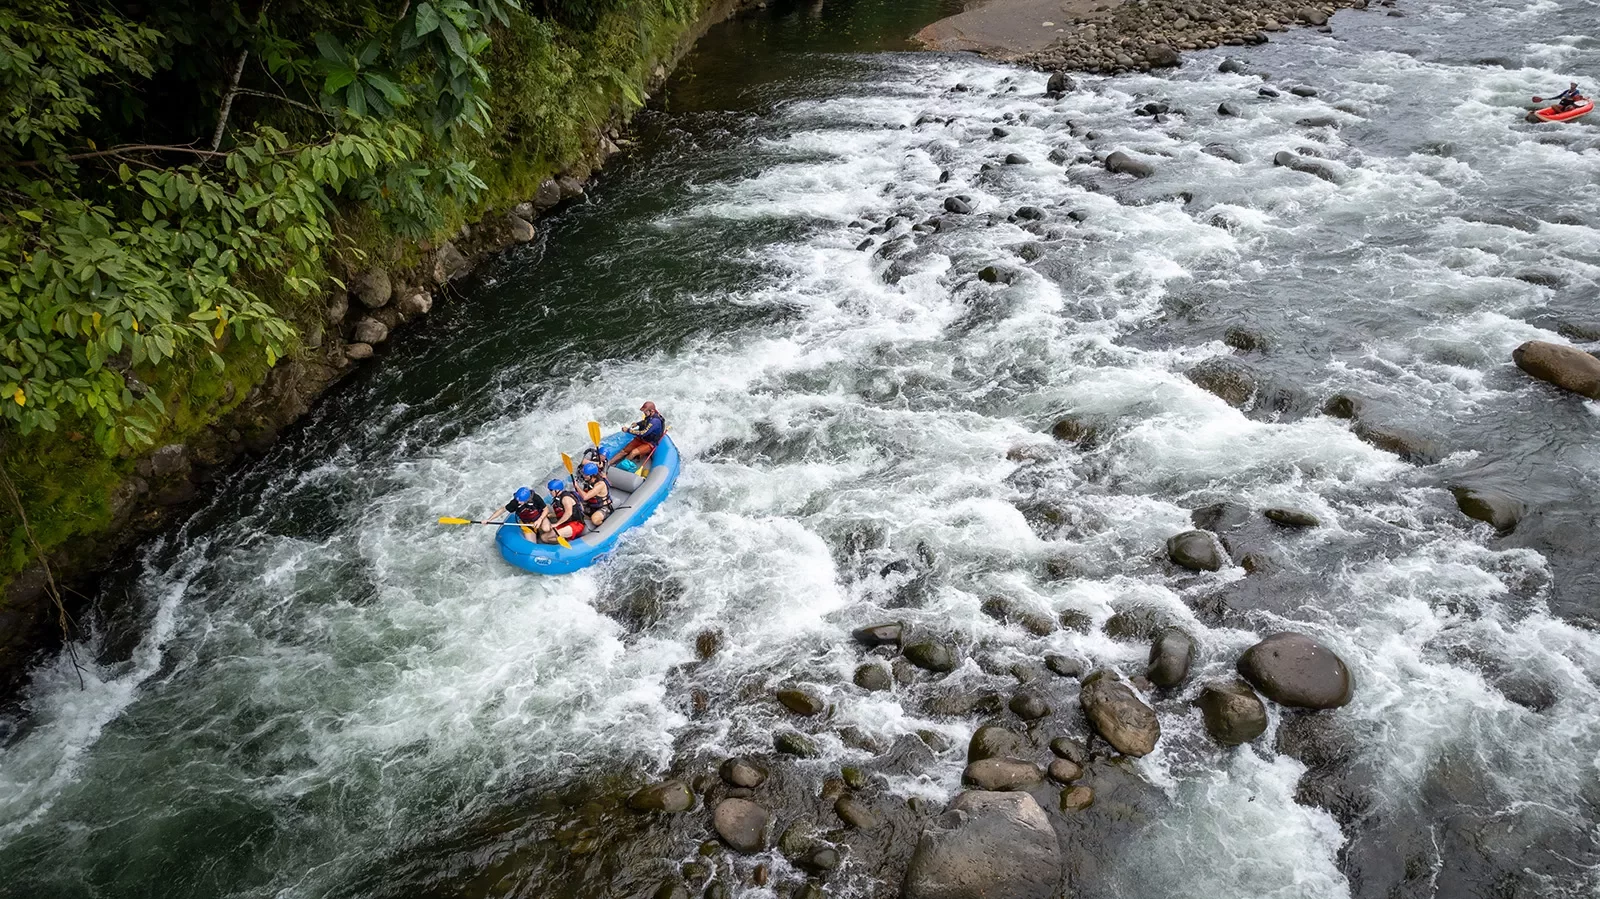 Rafting Down the River Costa Rica